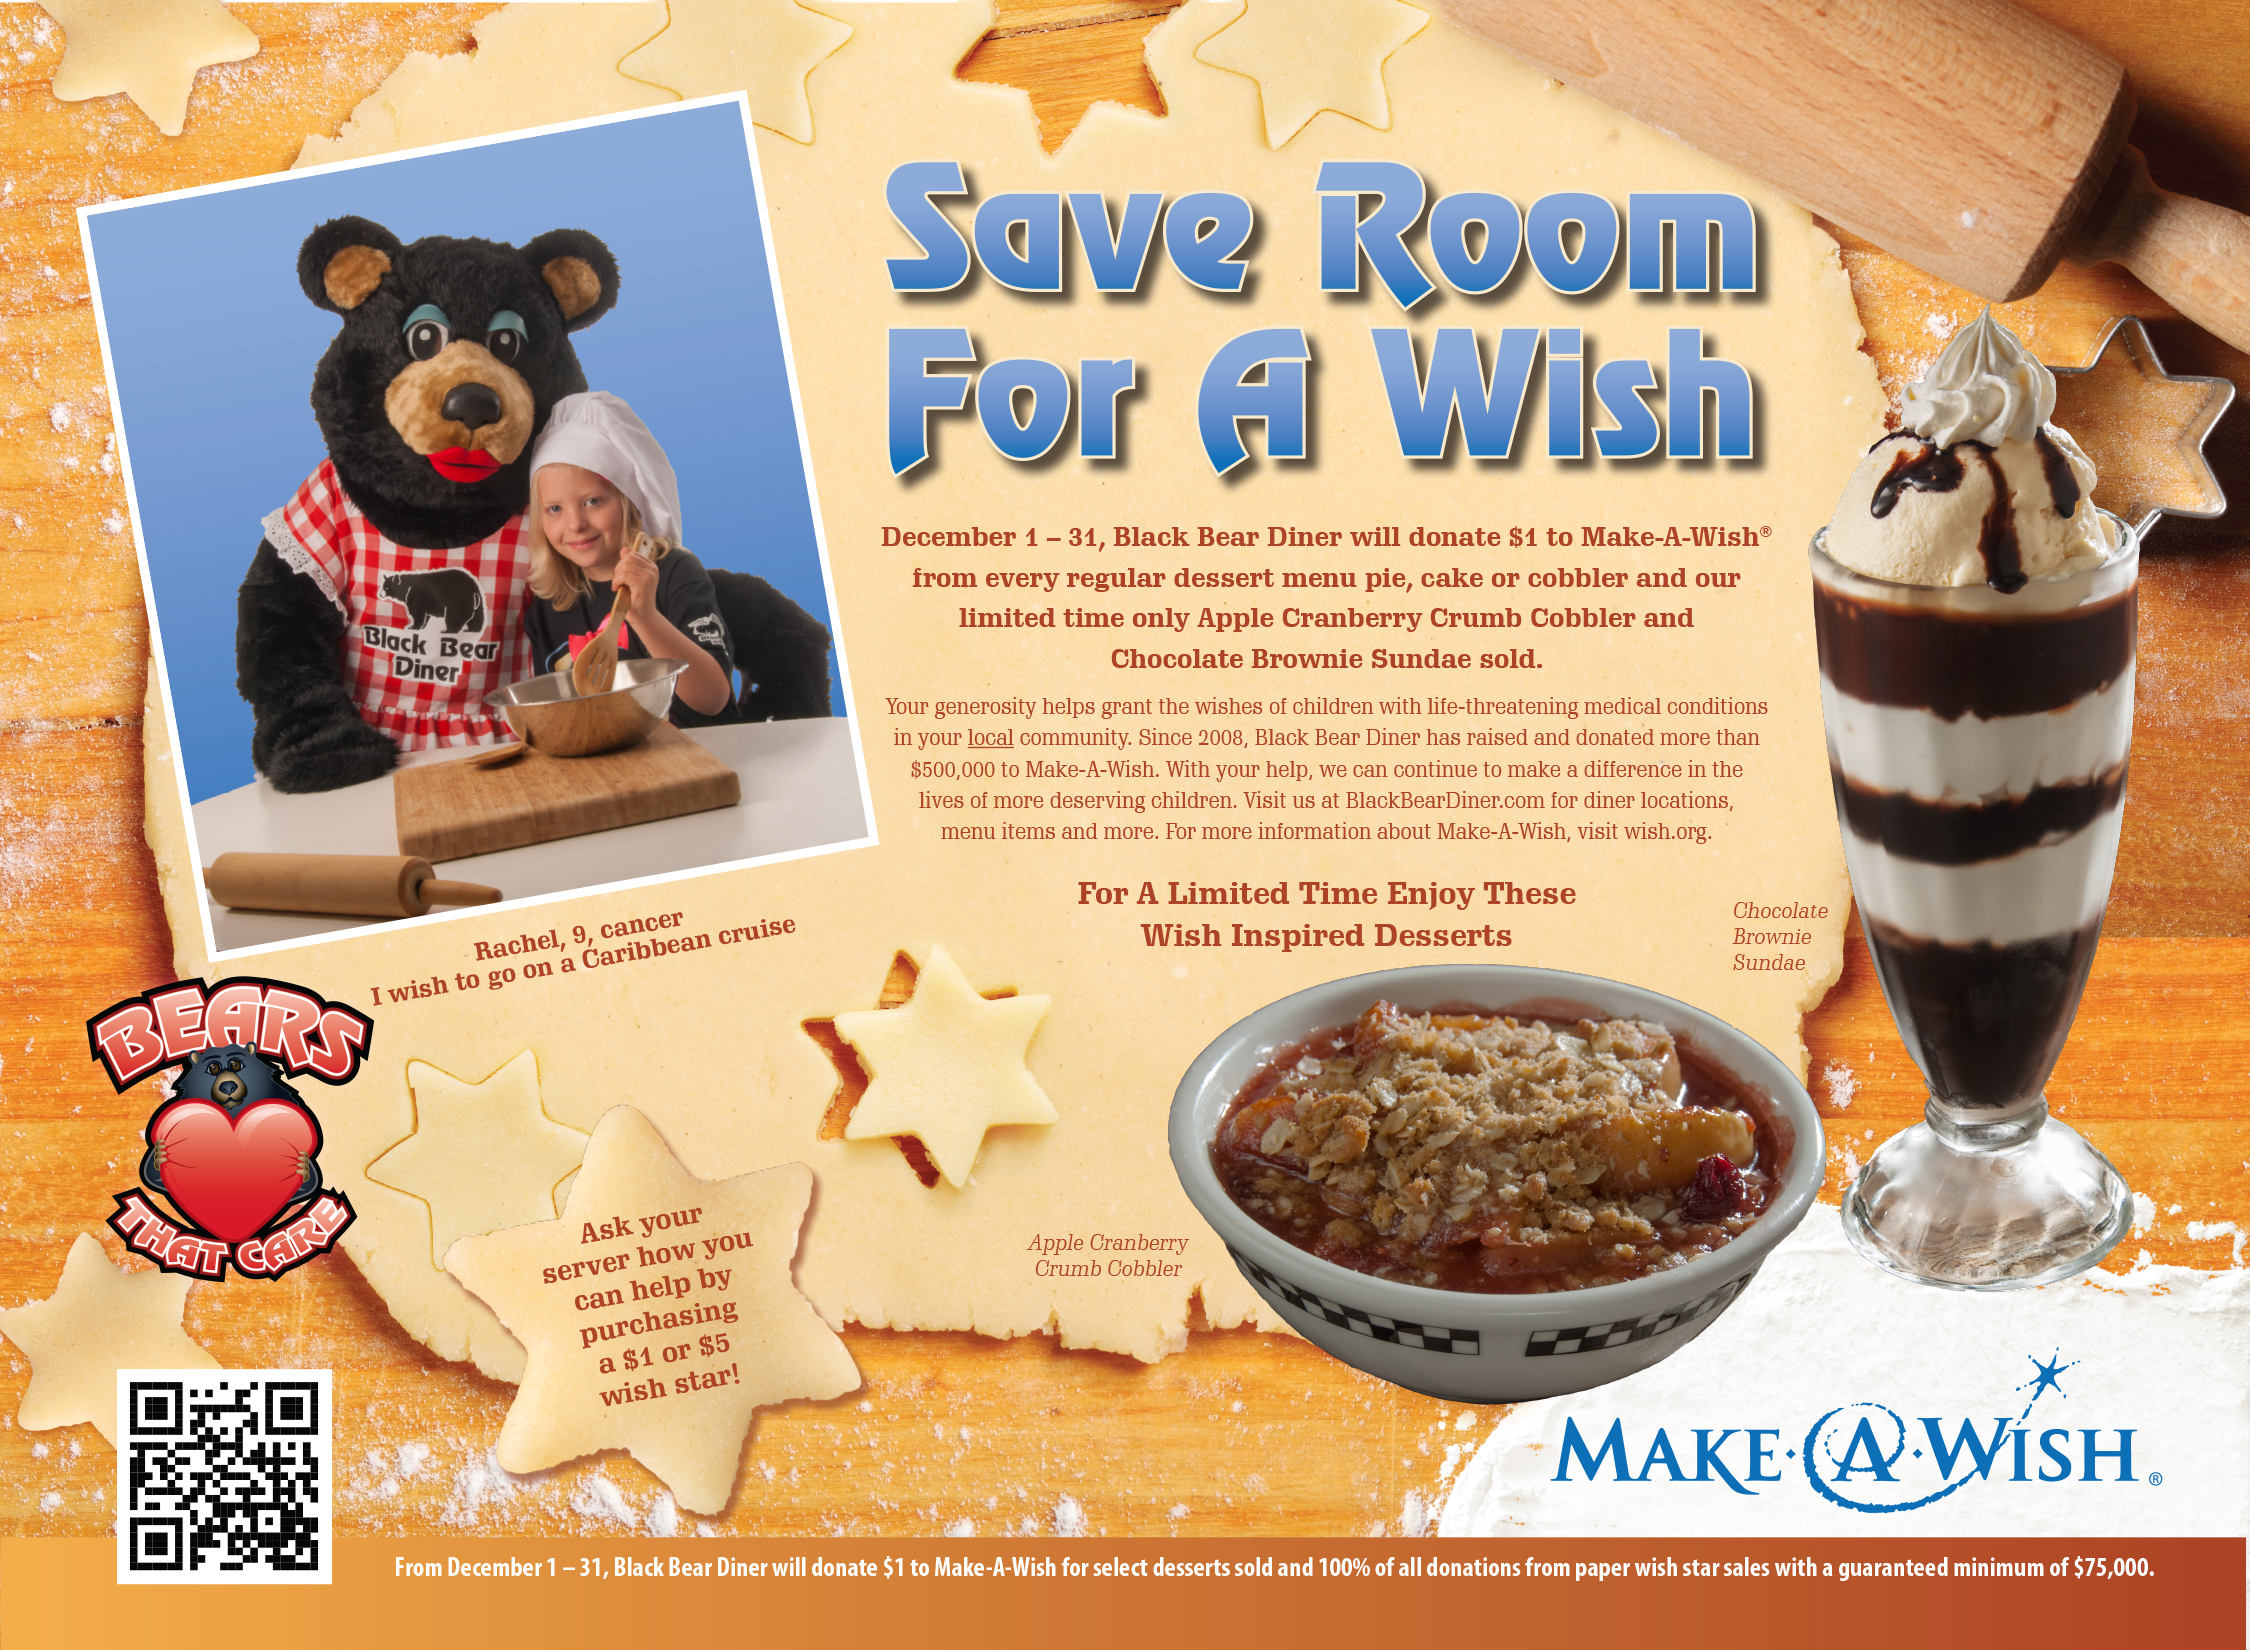 Black Bear Diner "Save Room For A Wish" promotional placemat